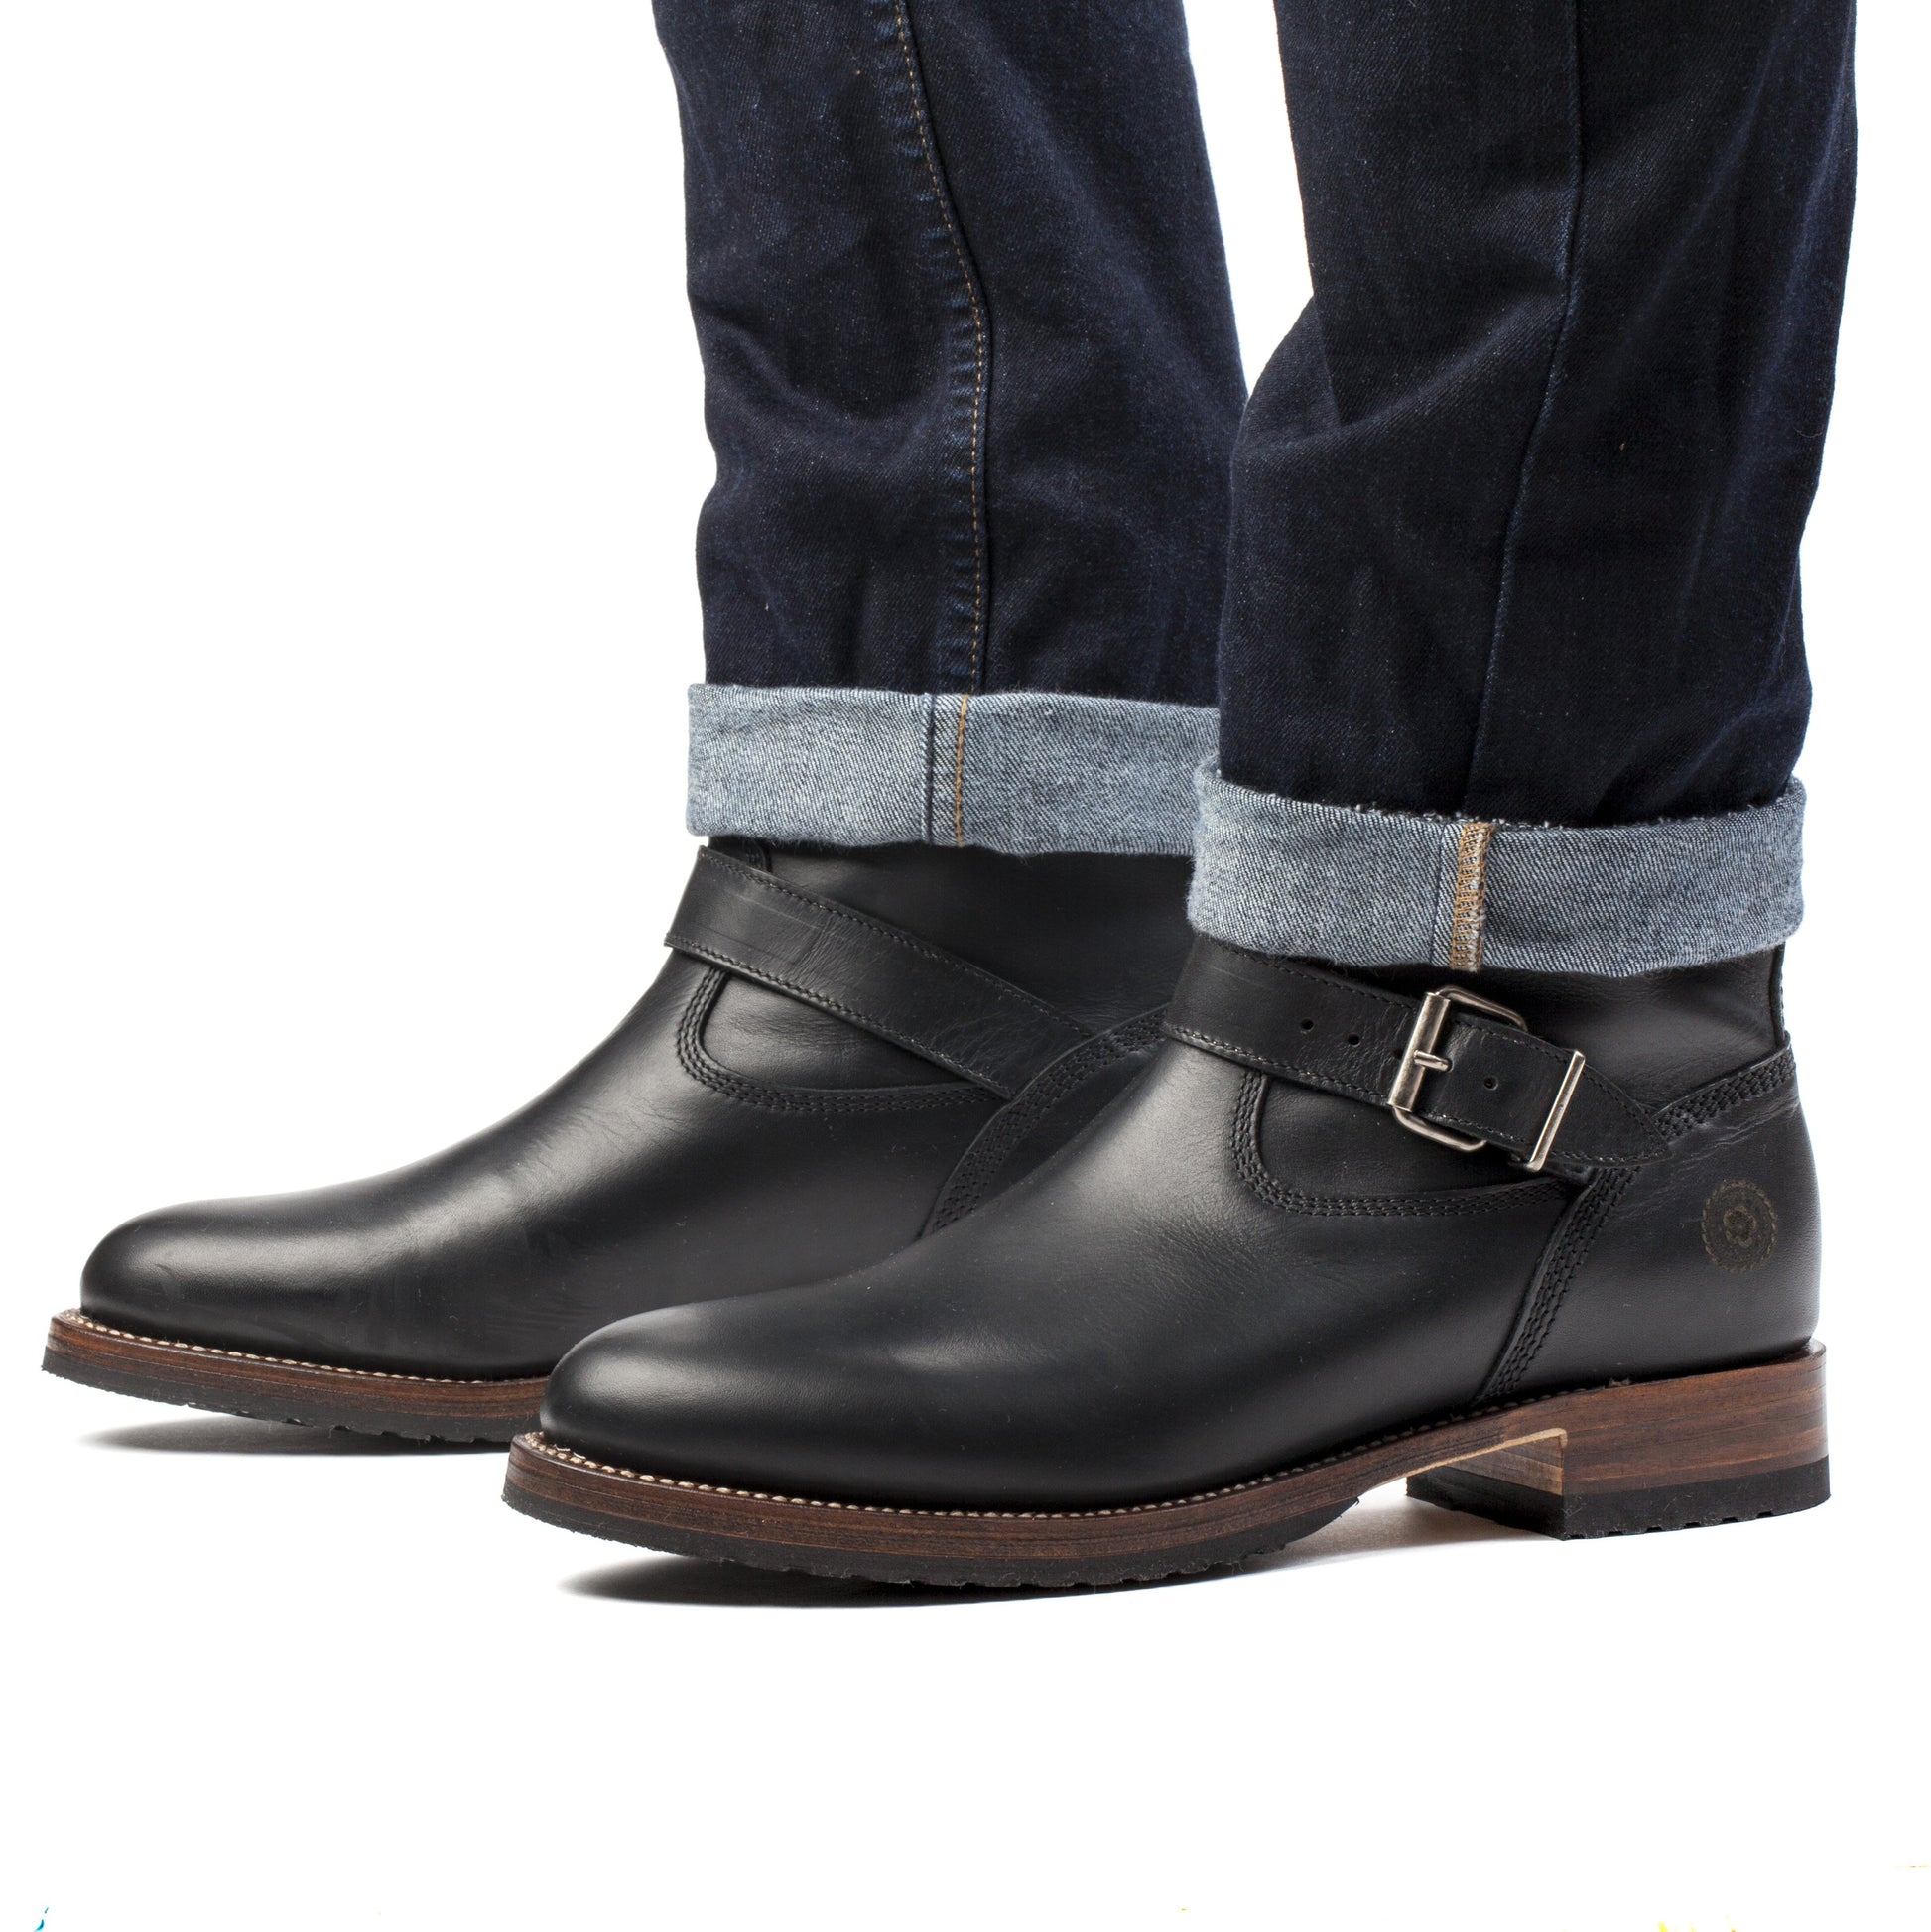 Mens Linesman Boot Black - Classic Engineer Boots - Ranch Road Boots™ Pair